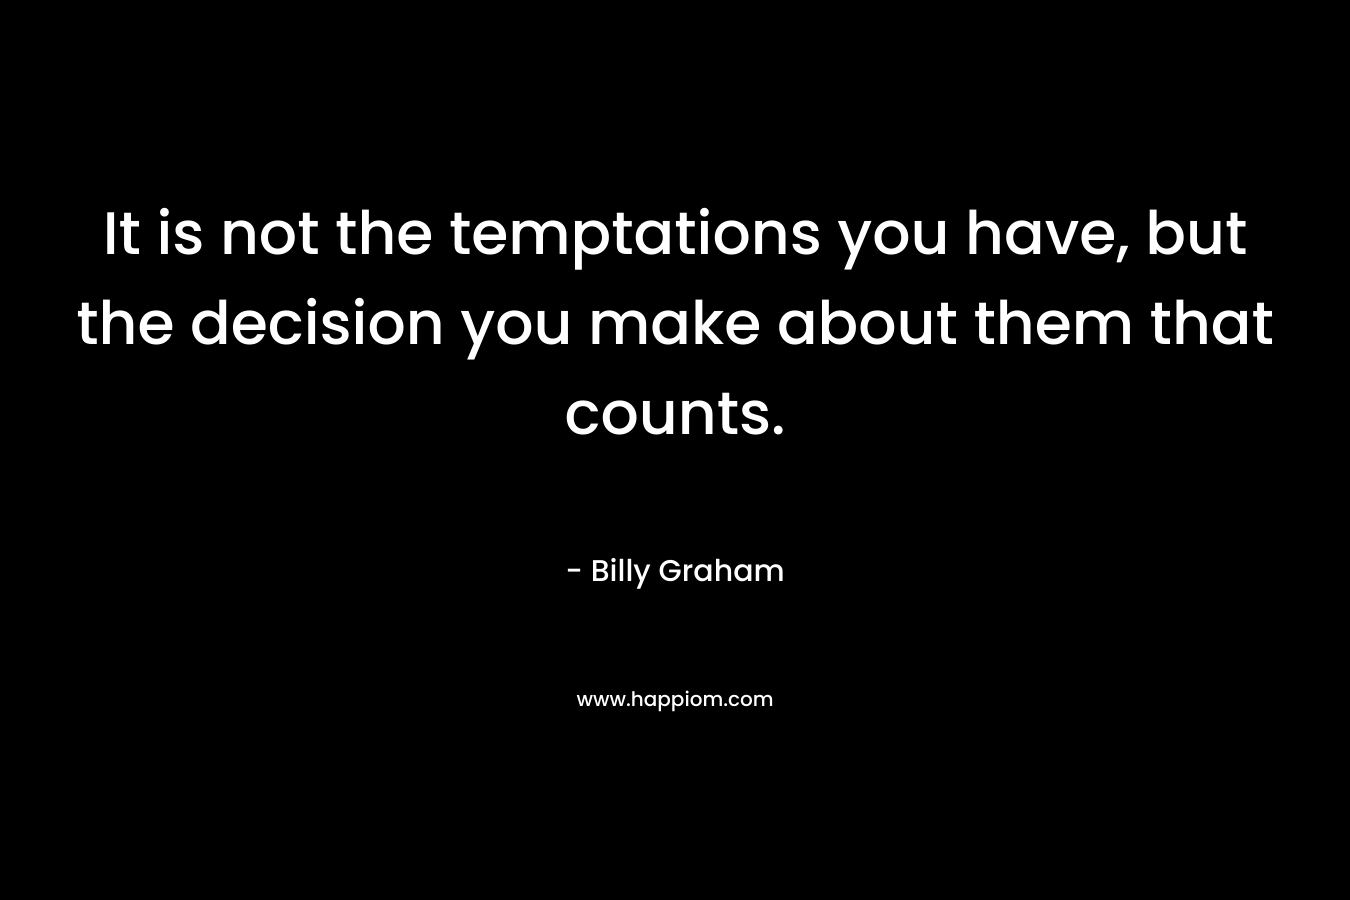 It is not the temptations you have, but the decision you make about them that counts. – Billy Graham